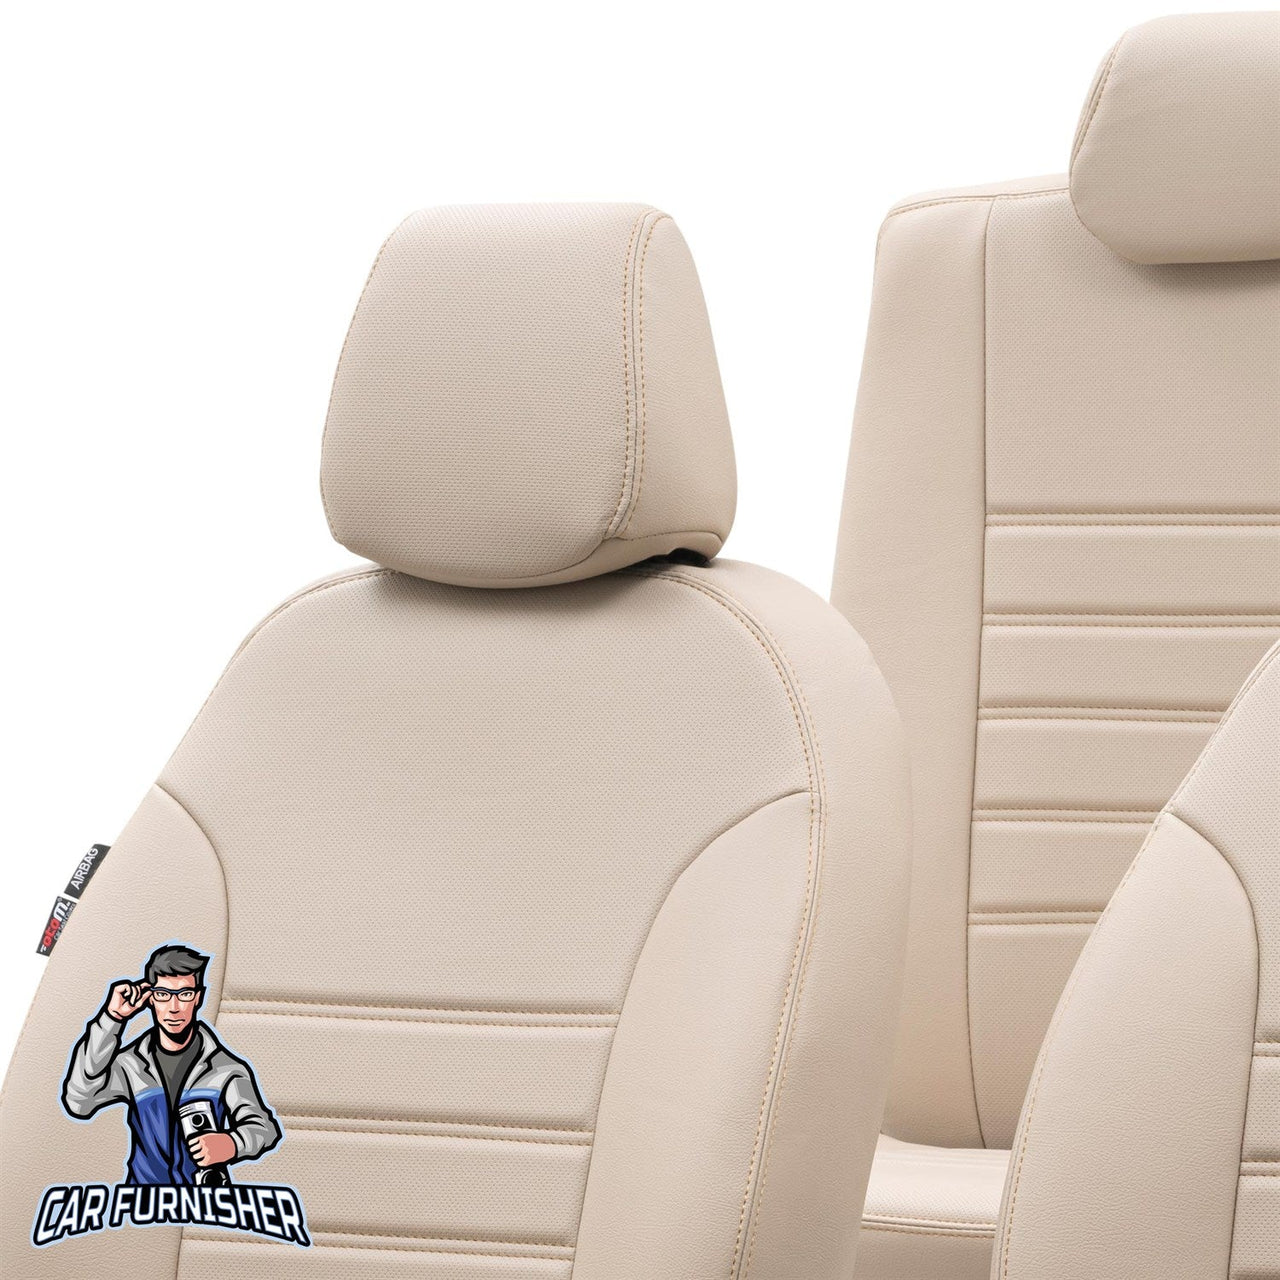 Volkswagen Caddy Seat Cover Istanbul Leather Design Beige Leather